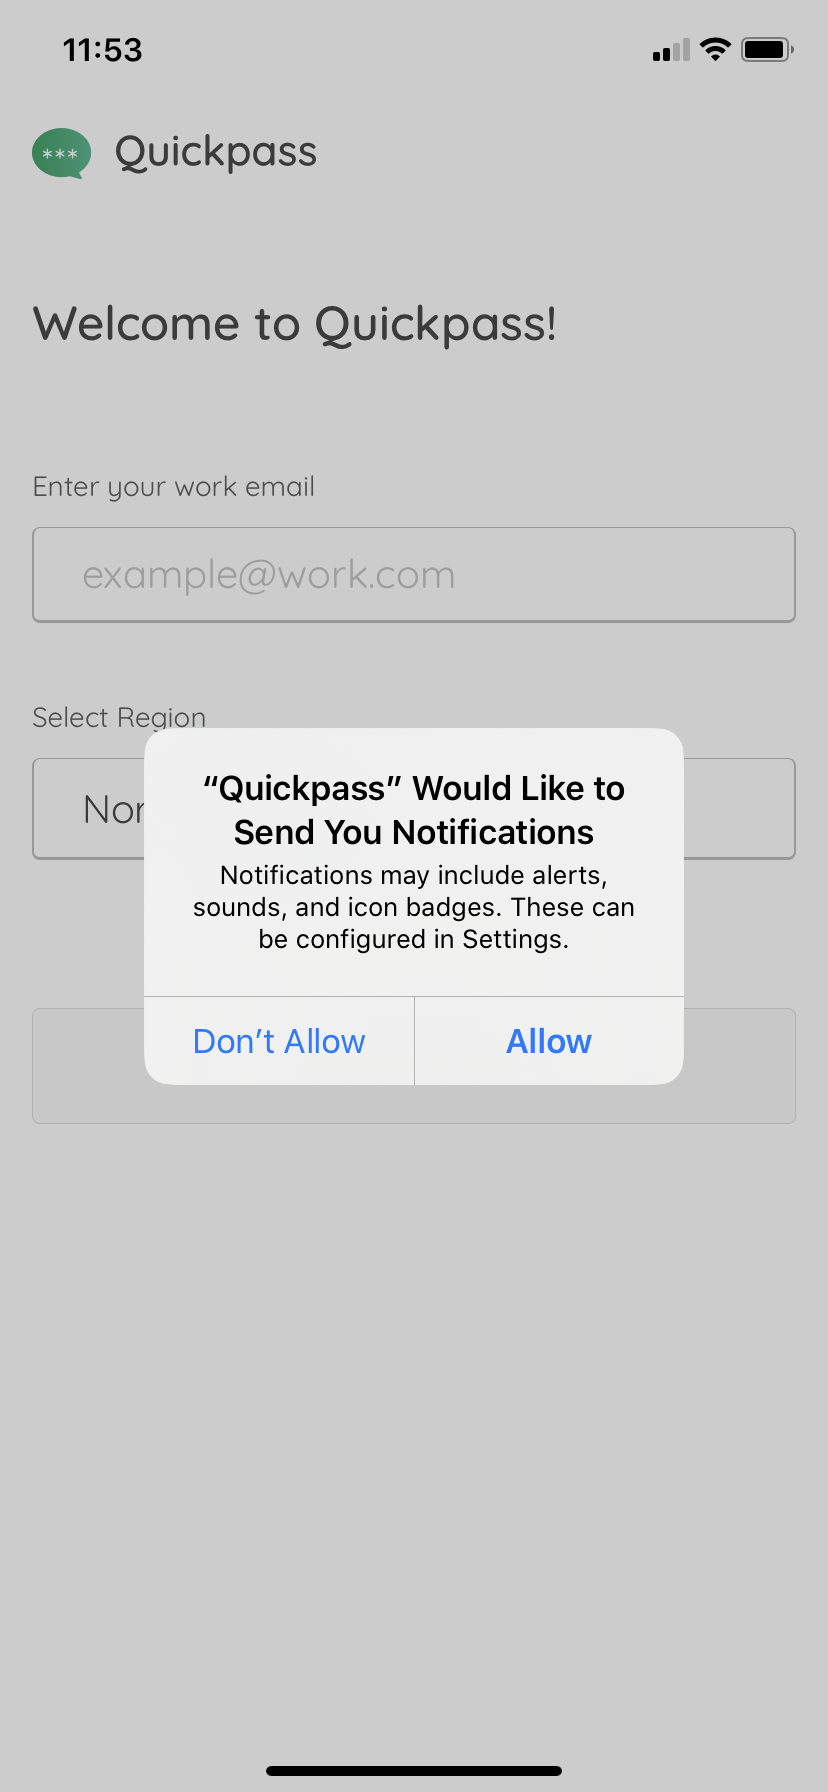 How to On-board the Quickpass Self-Serve Mobile App: End user